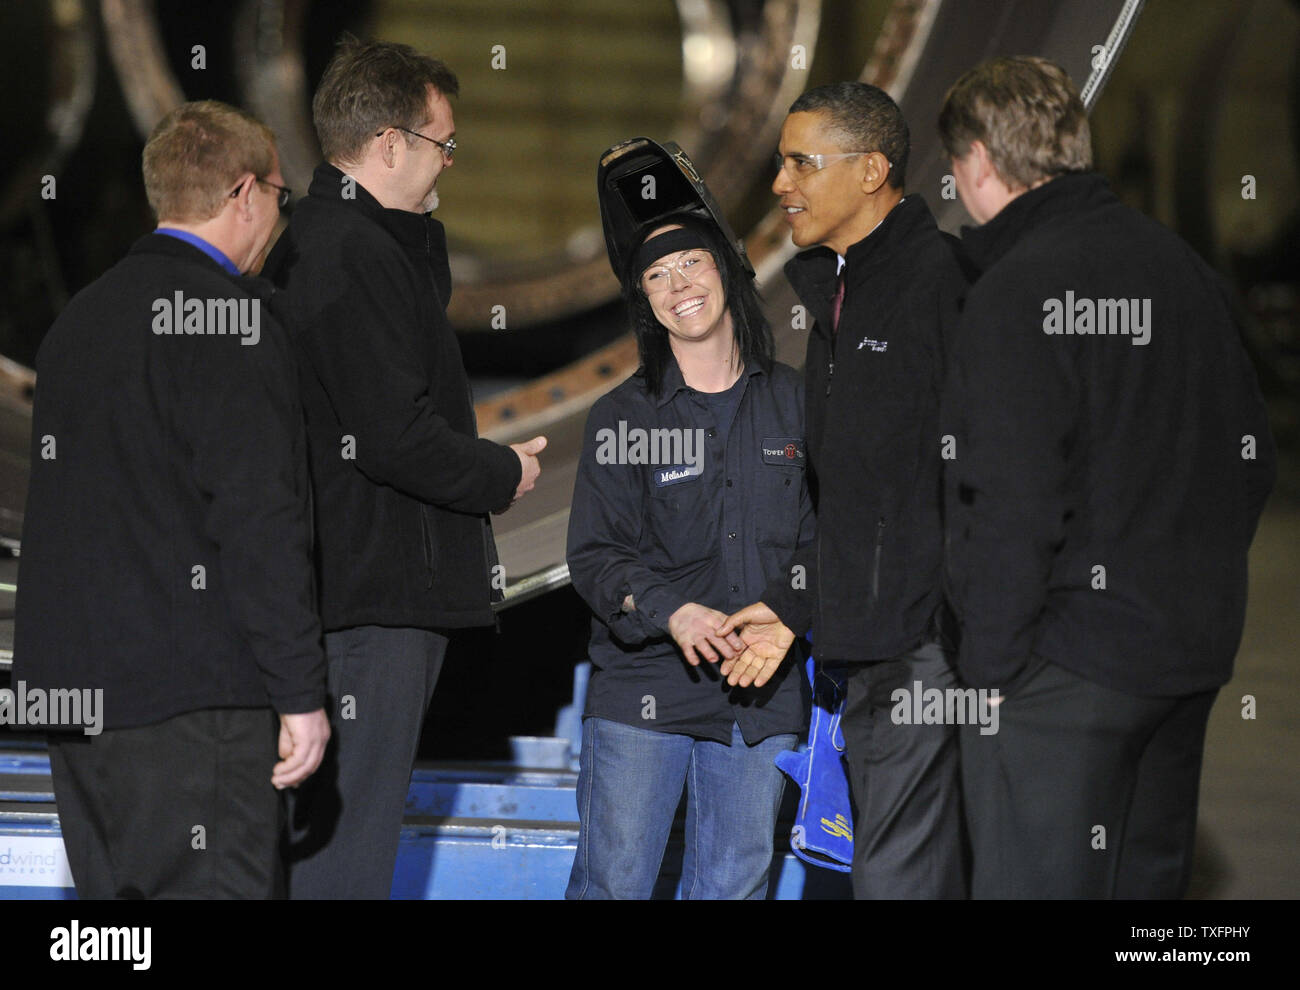 U. S. President Barack Obama (center right) shakes hands with Melissa Peters (C) as he tours Tower Tech Systems, Inc., a manufacturer of utility-scale wind towers and monopiles for on- and off-shore wind development,  with executive Paul Smith (center left) and other executives in Manitowoc, Wisconsin on January 26, 2011. President Obama, Vice President Joe Biden and other members of the President's Cabinet traveled across the country Wednesday to highlight the administration's efforts to rebuild the American economy.      UPI/Brian Kersey Stock Photo